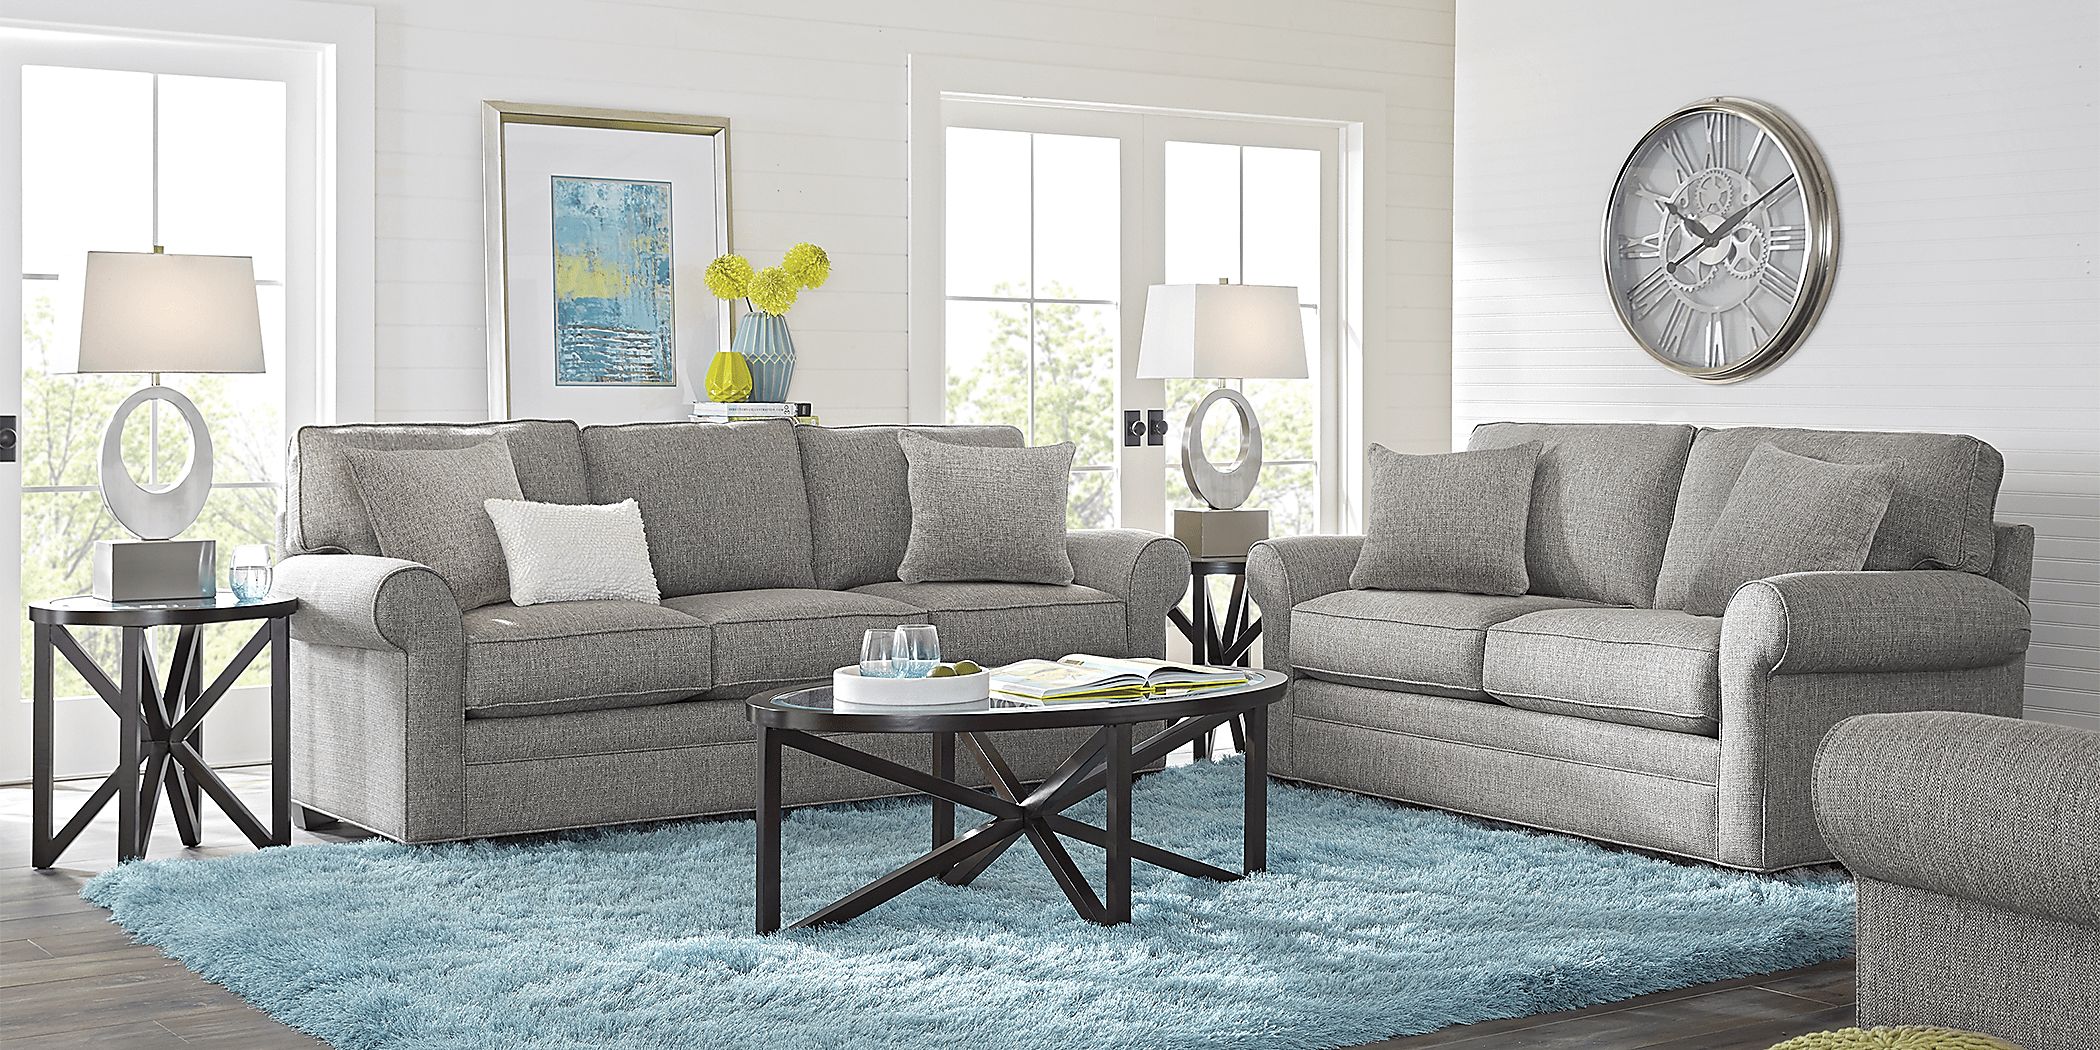 Cindy Crawford Home Bellingham Gray Textured 7 Pc Living Room